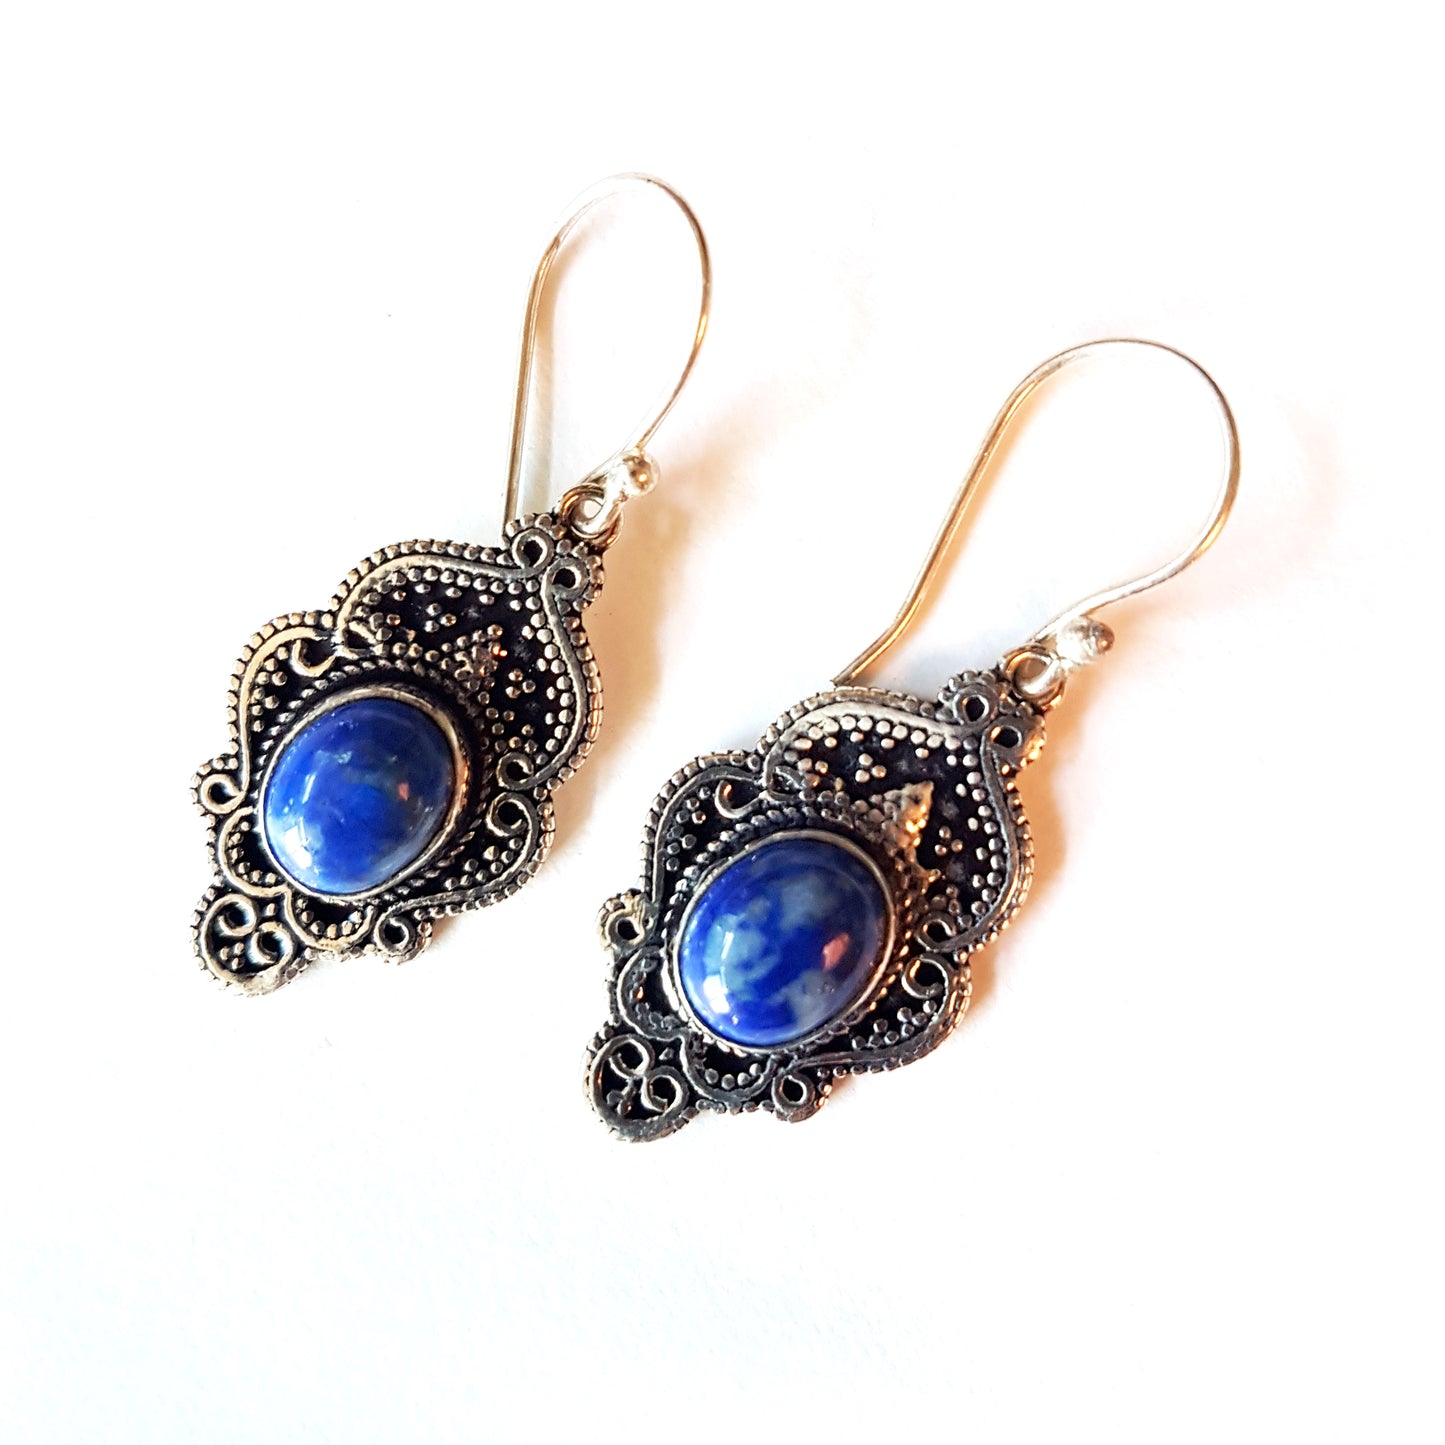 Medieval earrings with inlaid gemstones. Antique silver filigree setting with semi precious stones. Victorian Renaissance jewelry. 2 inches.